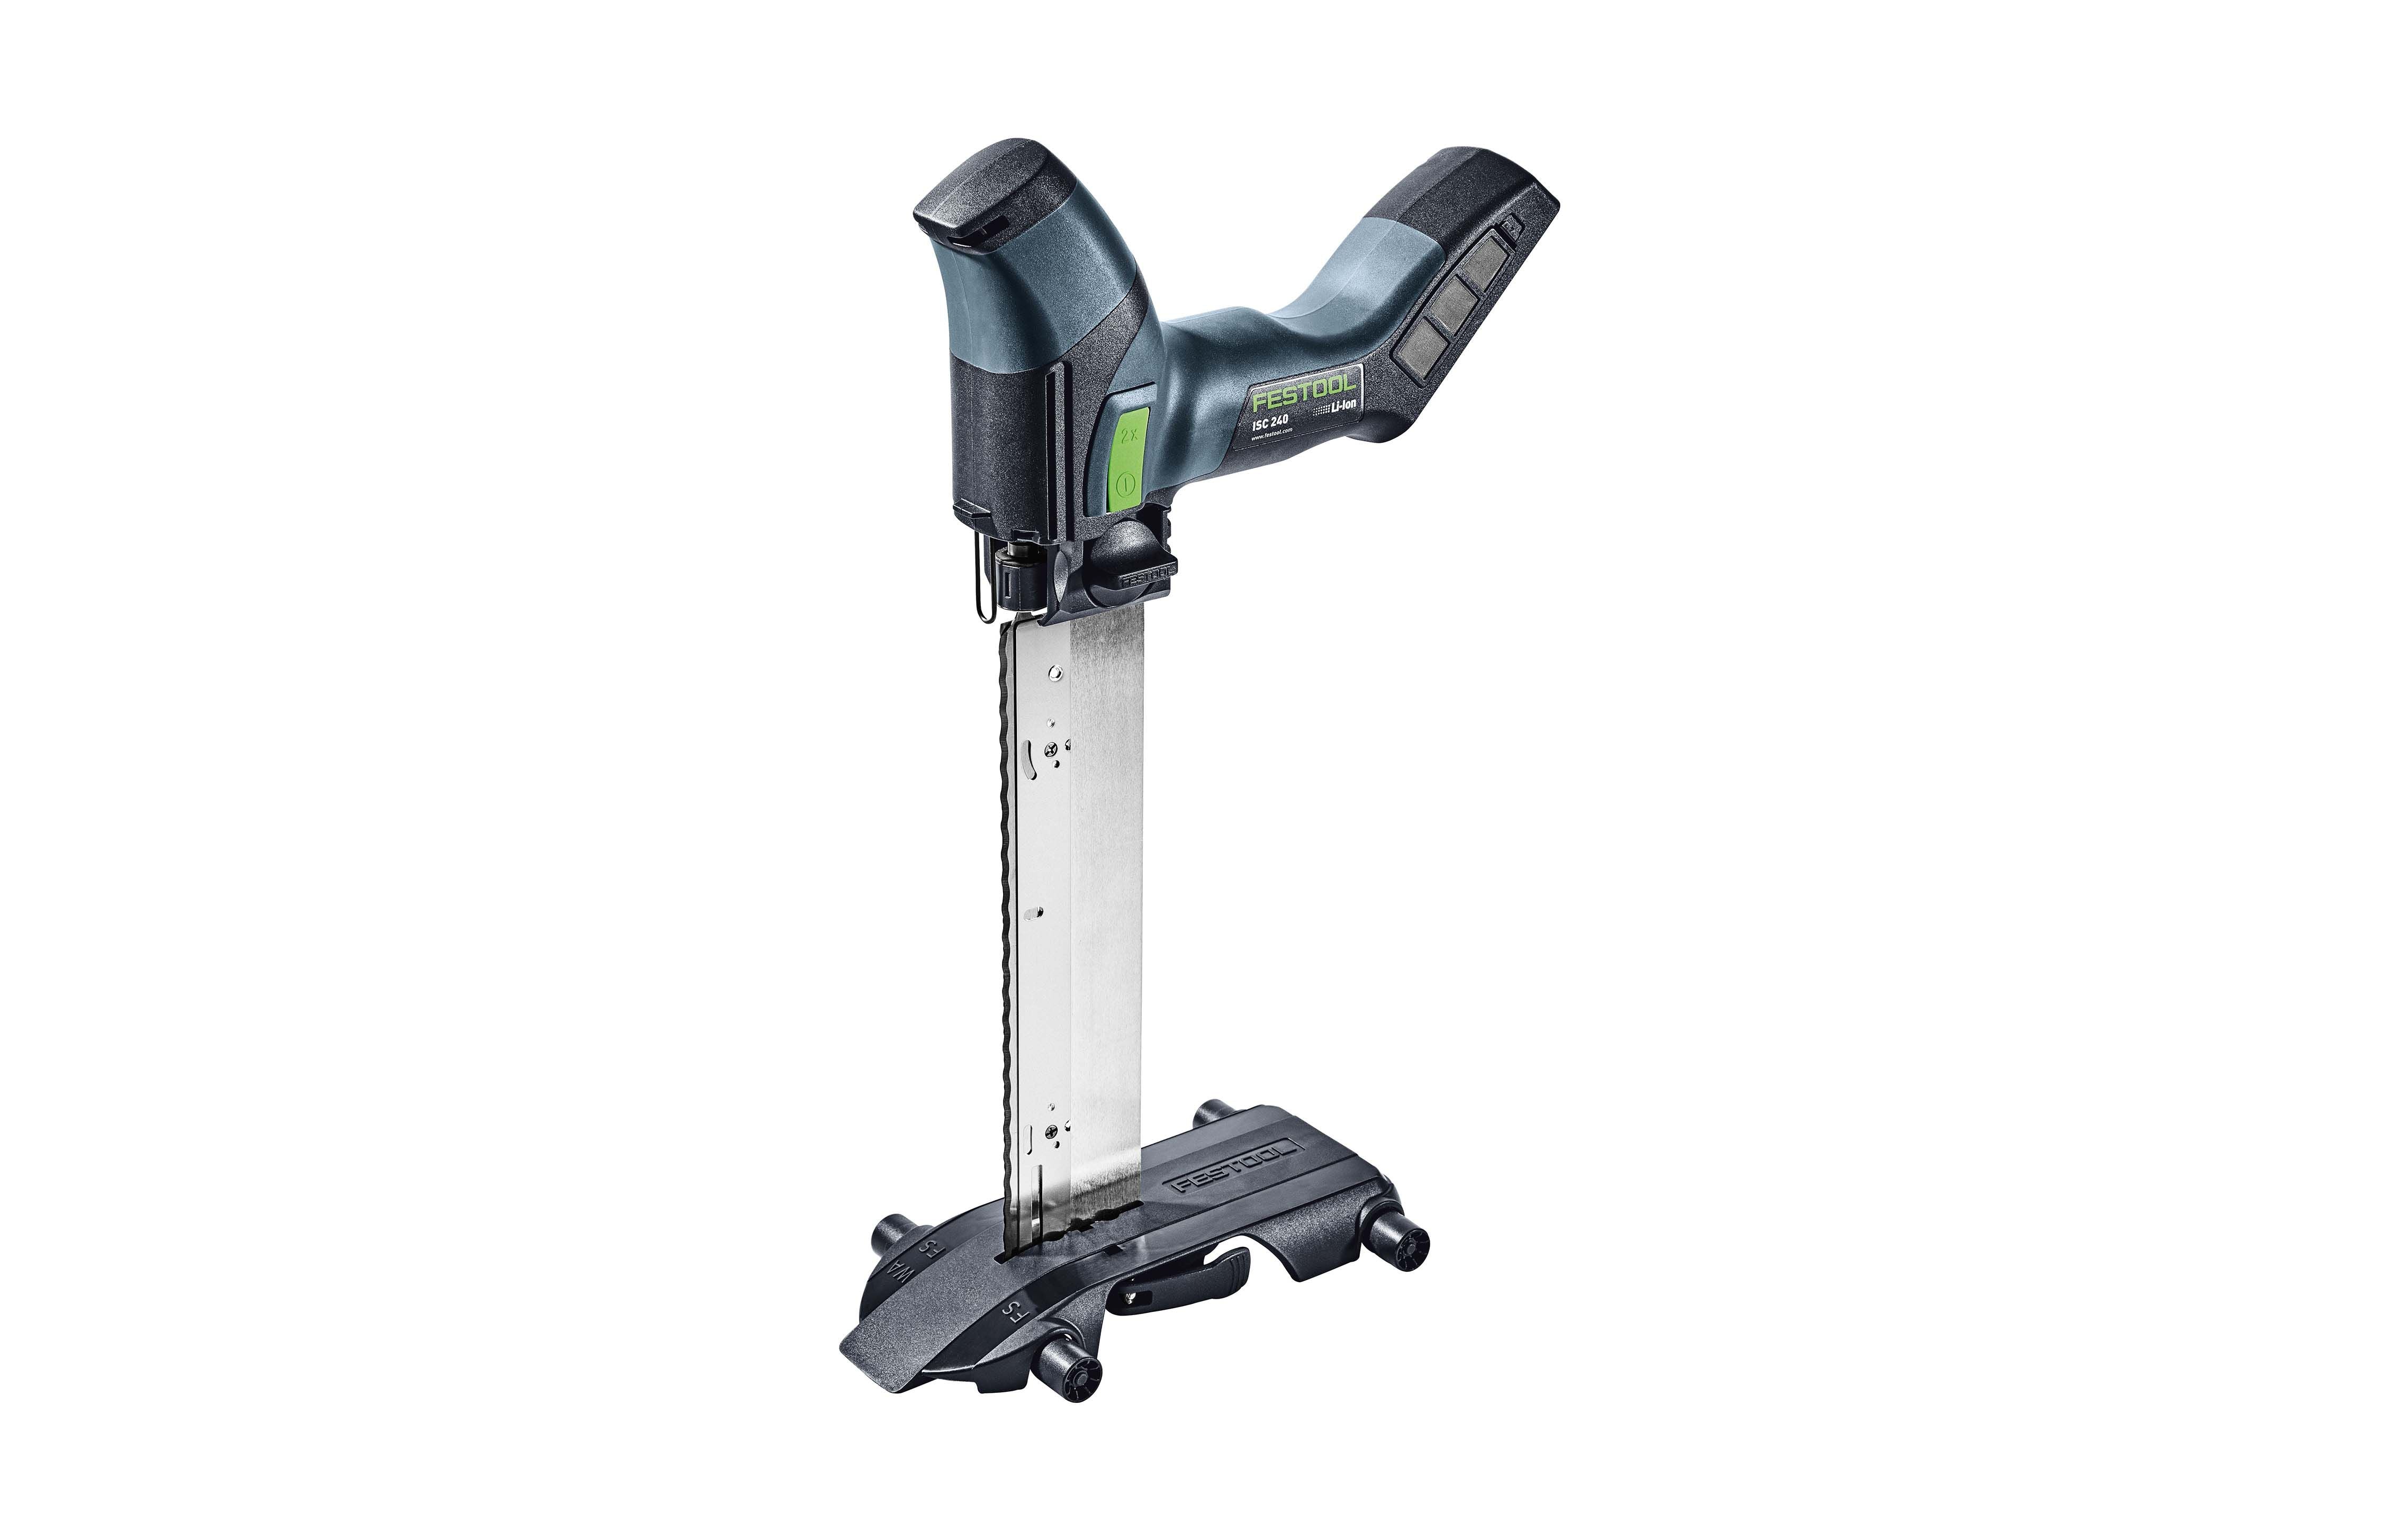 ISC 240 18V 240mm Cordless Insulation Saw 5.0Ah Bluetooth in Systainer 578292 by Festool